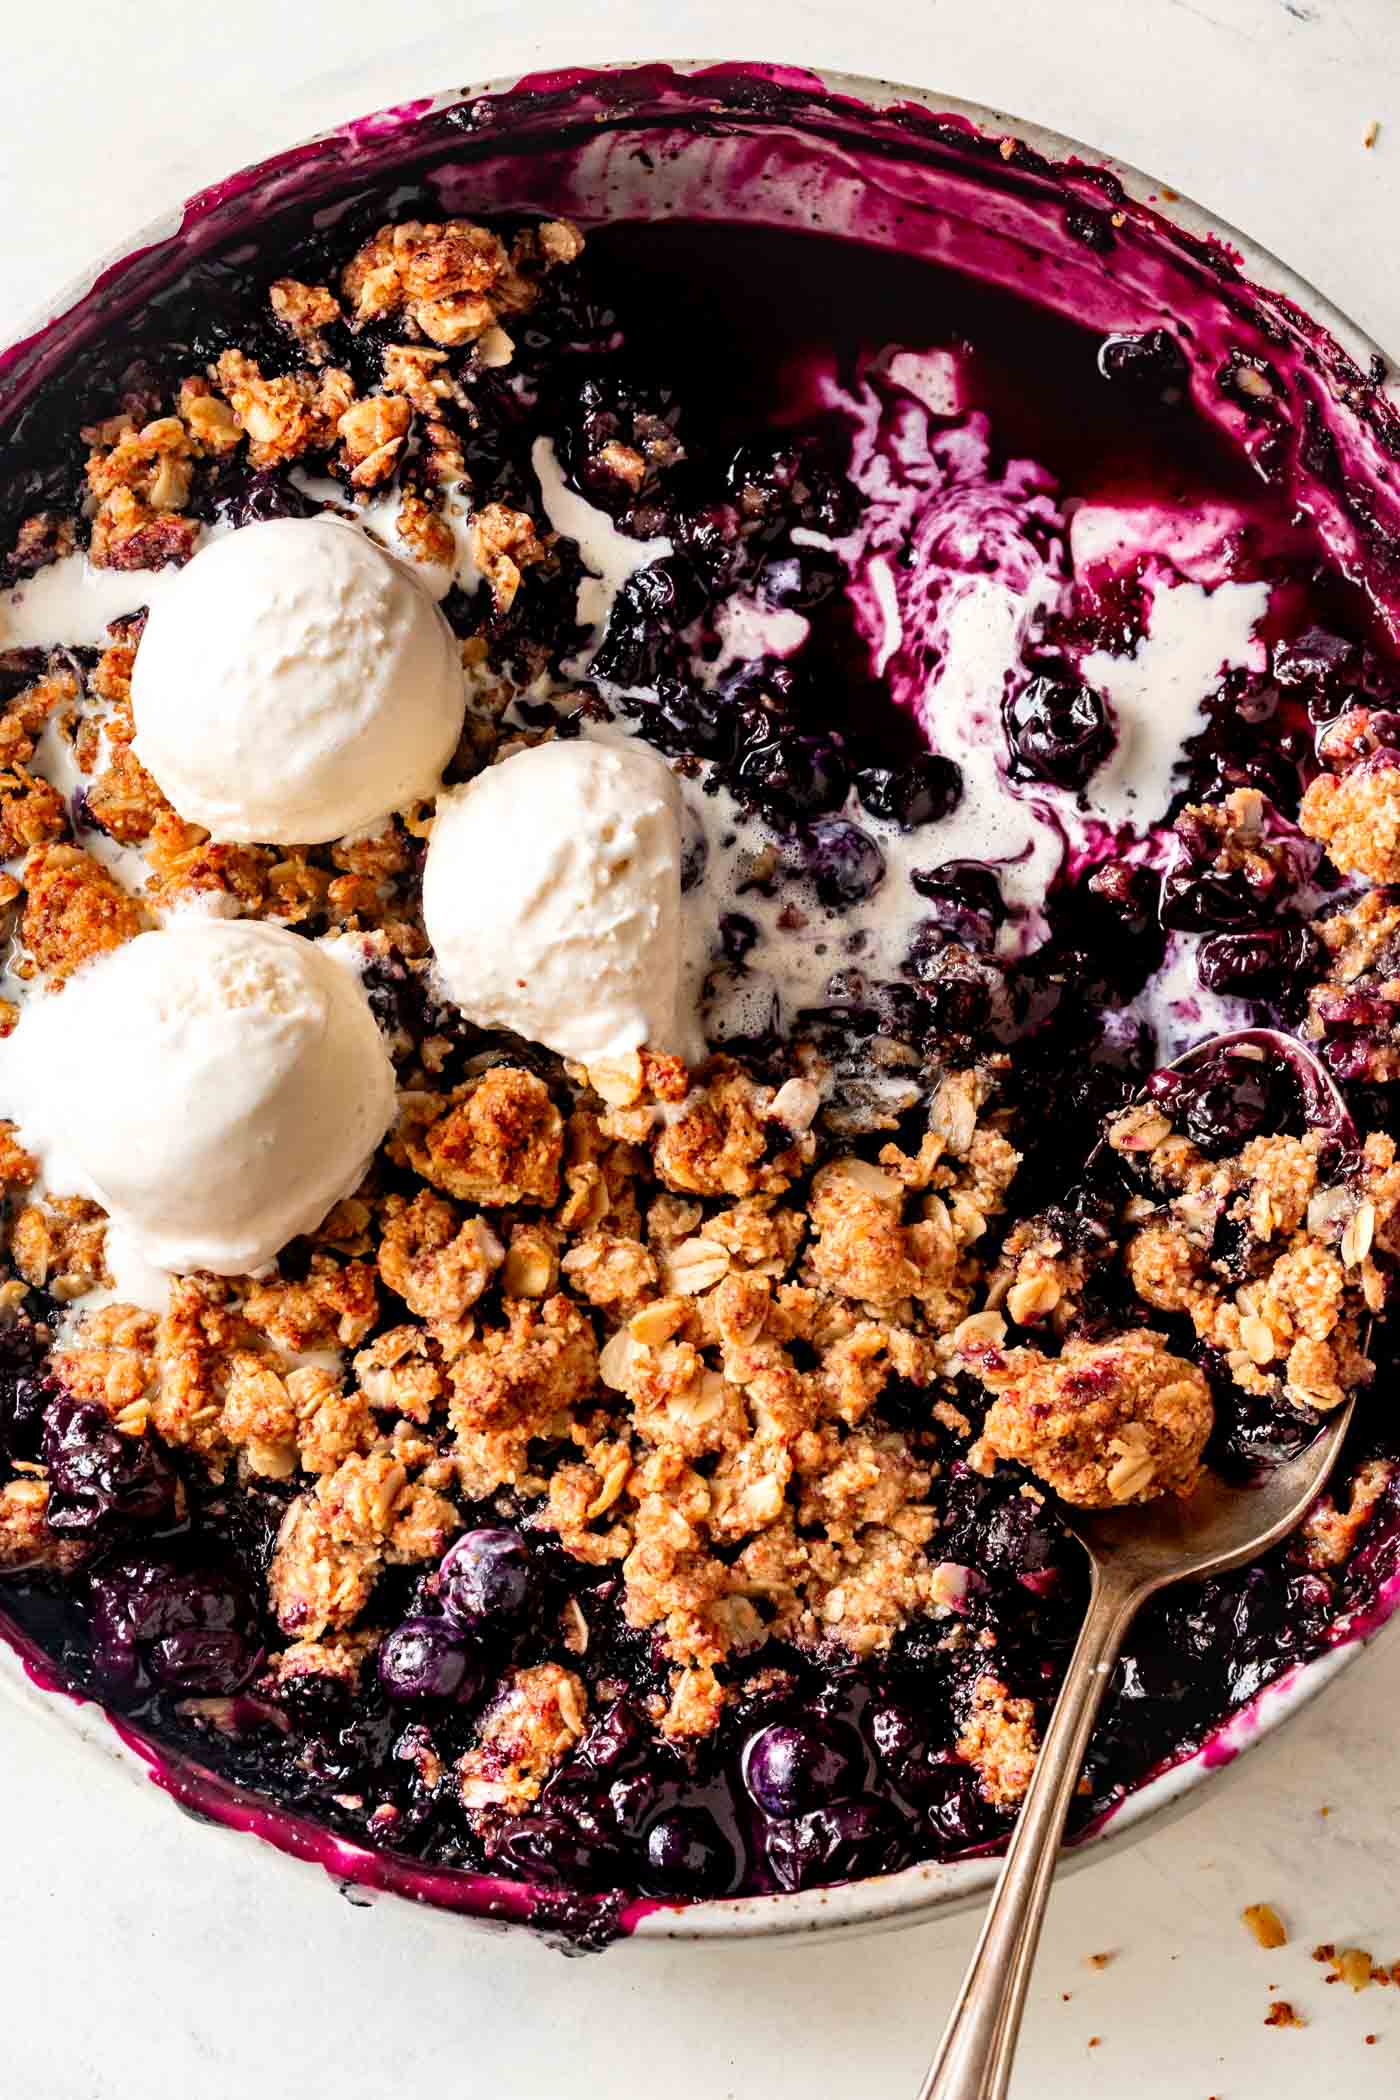 Blueberry crisp is baked in a pan and topped with melty scoops of ice cream